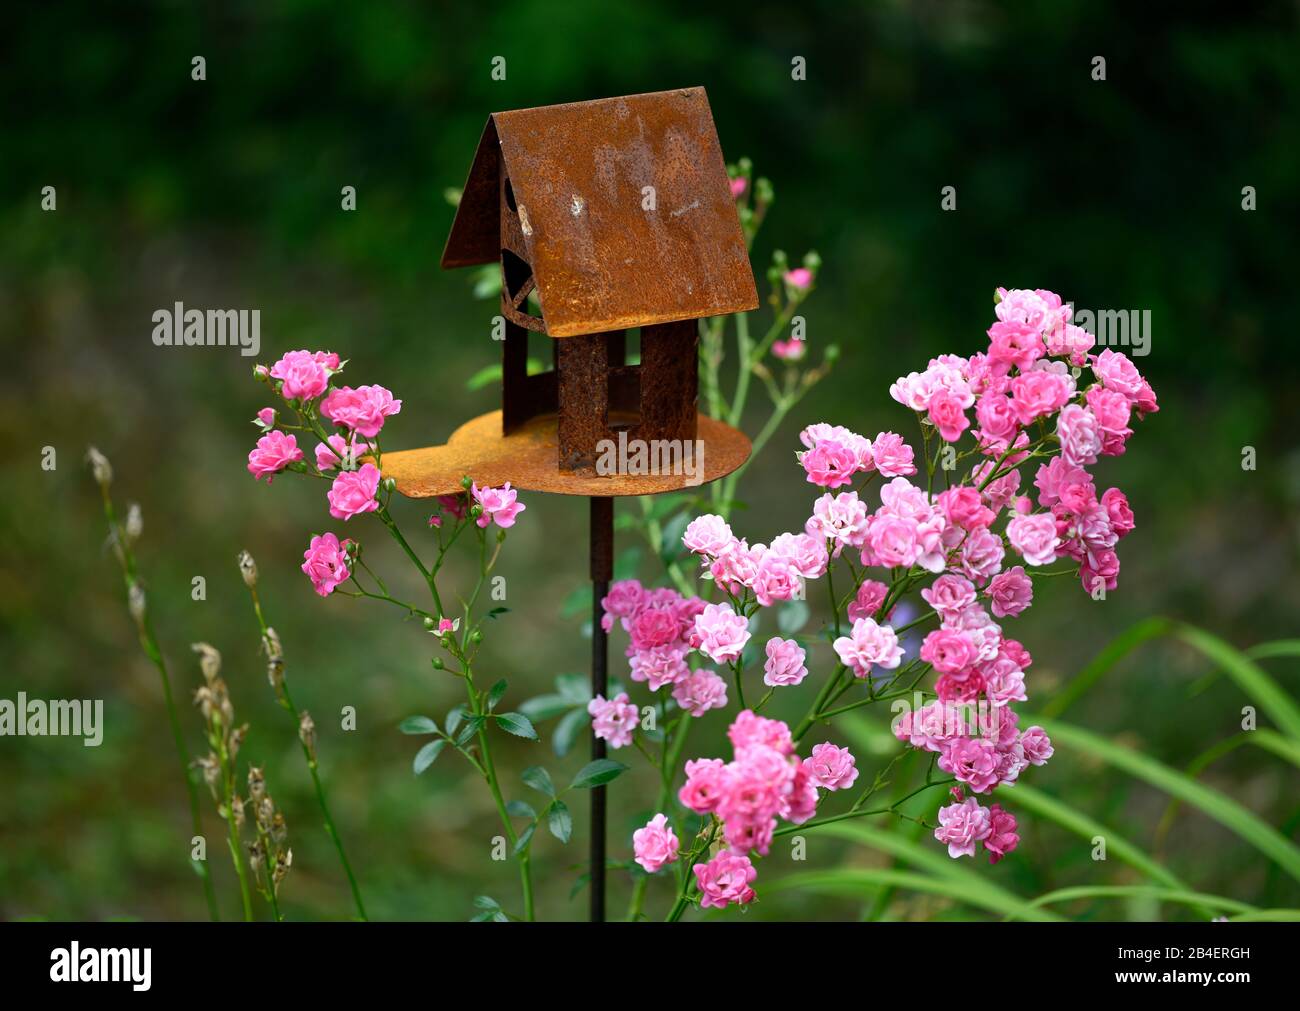 Birdhouse and rose bush, pink rose (Rosa sp.) In the garden, Baden-Wurttemberg, Germany Stock Photo